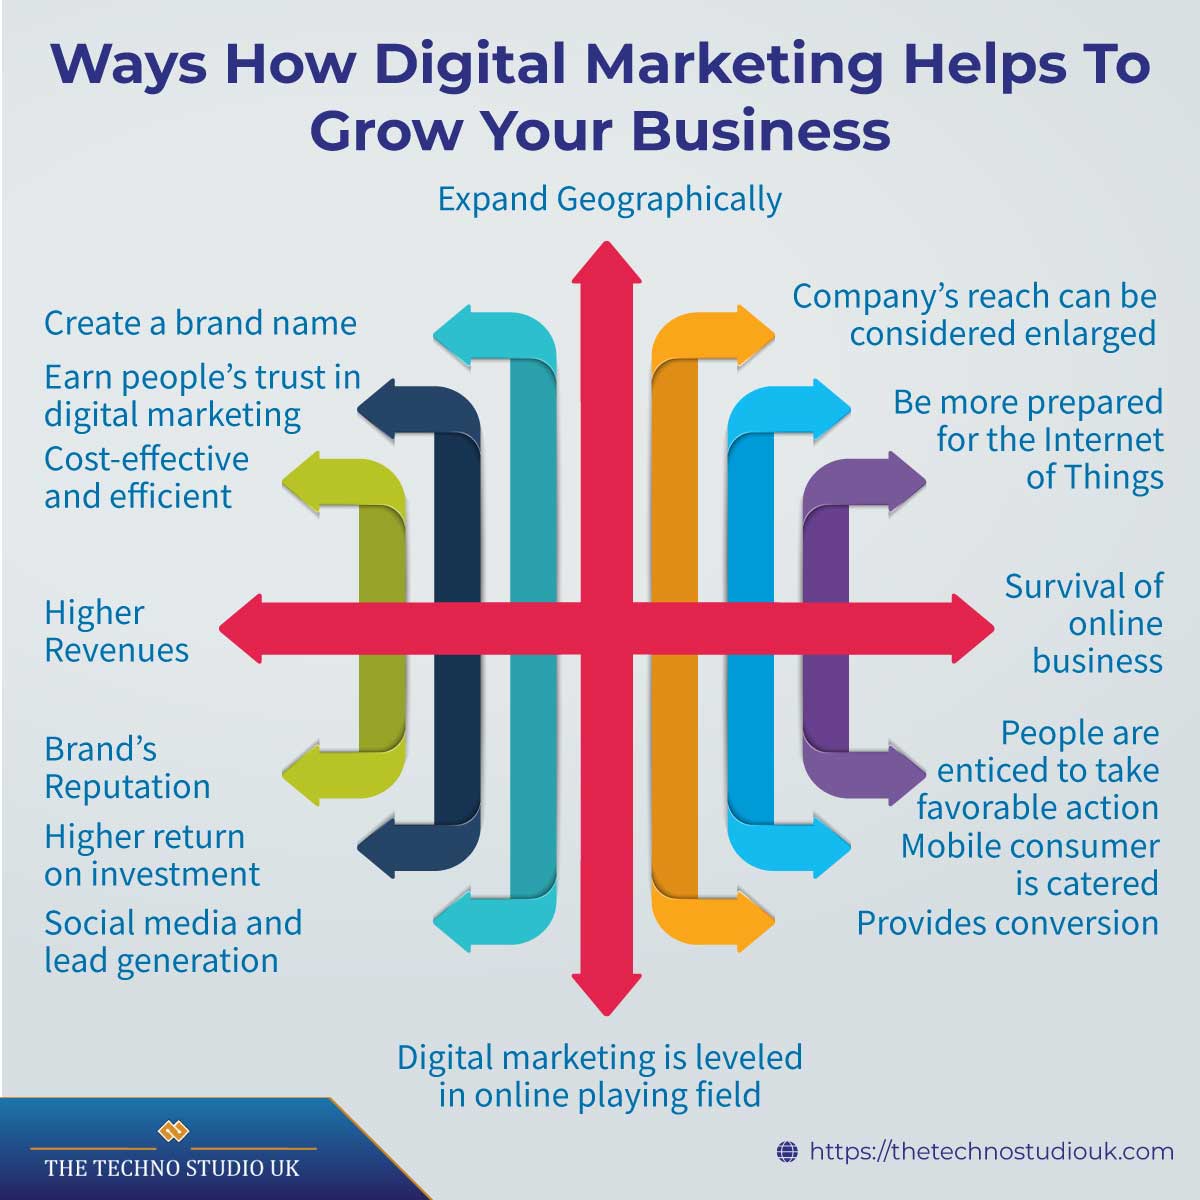 15 Ways How Digital Marketing Helps To Grow Your Business in 2022